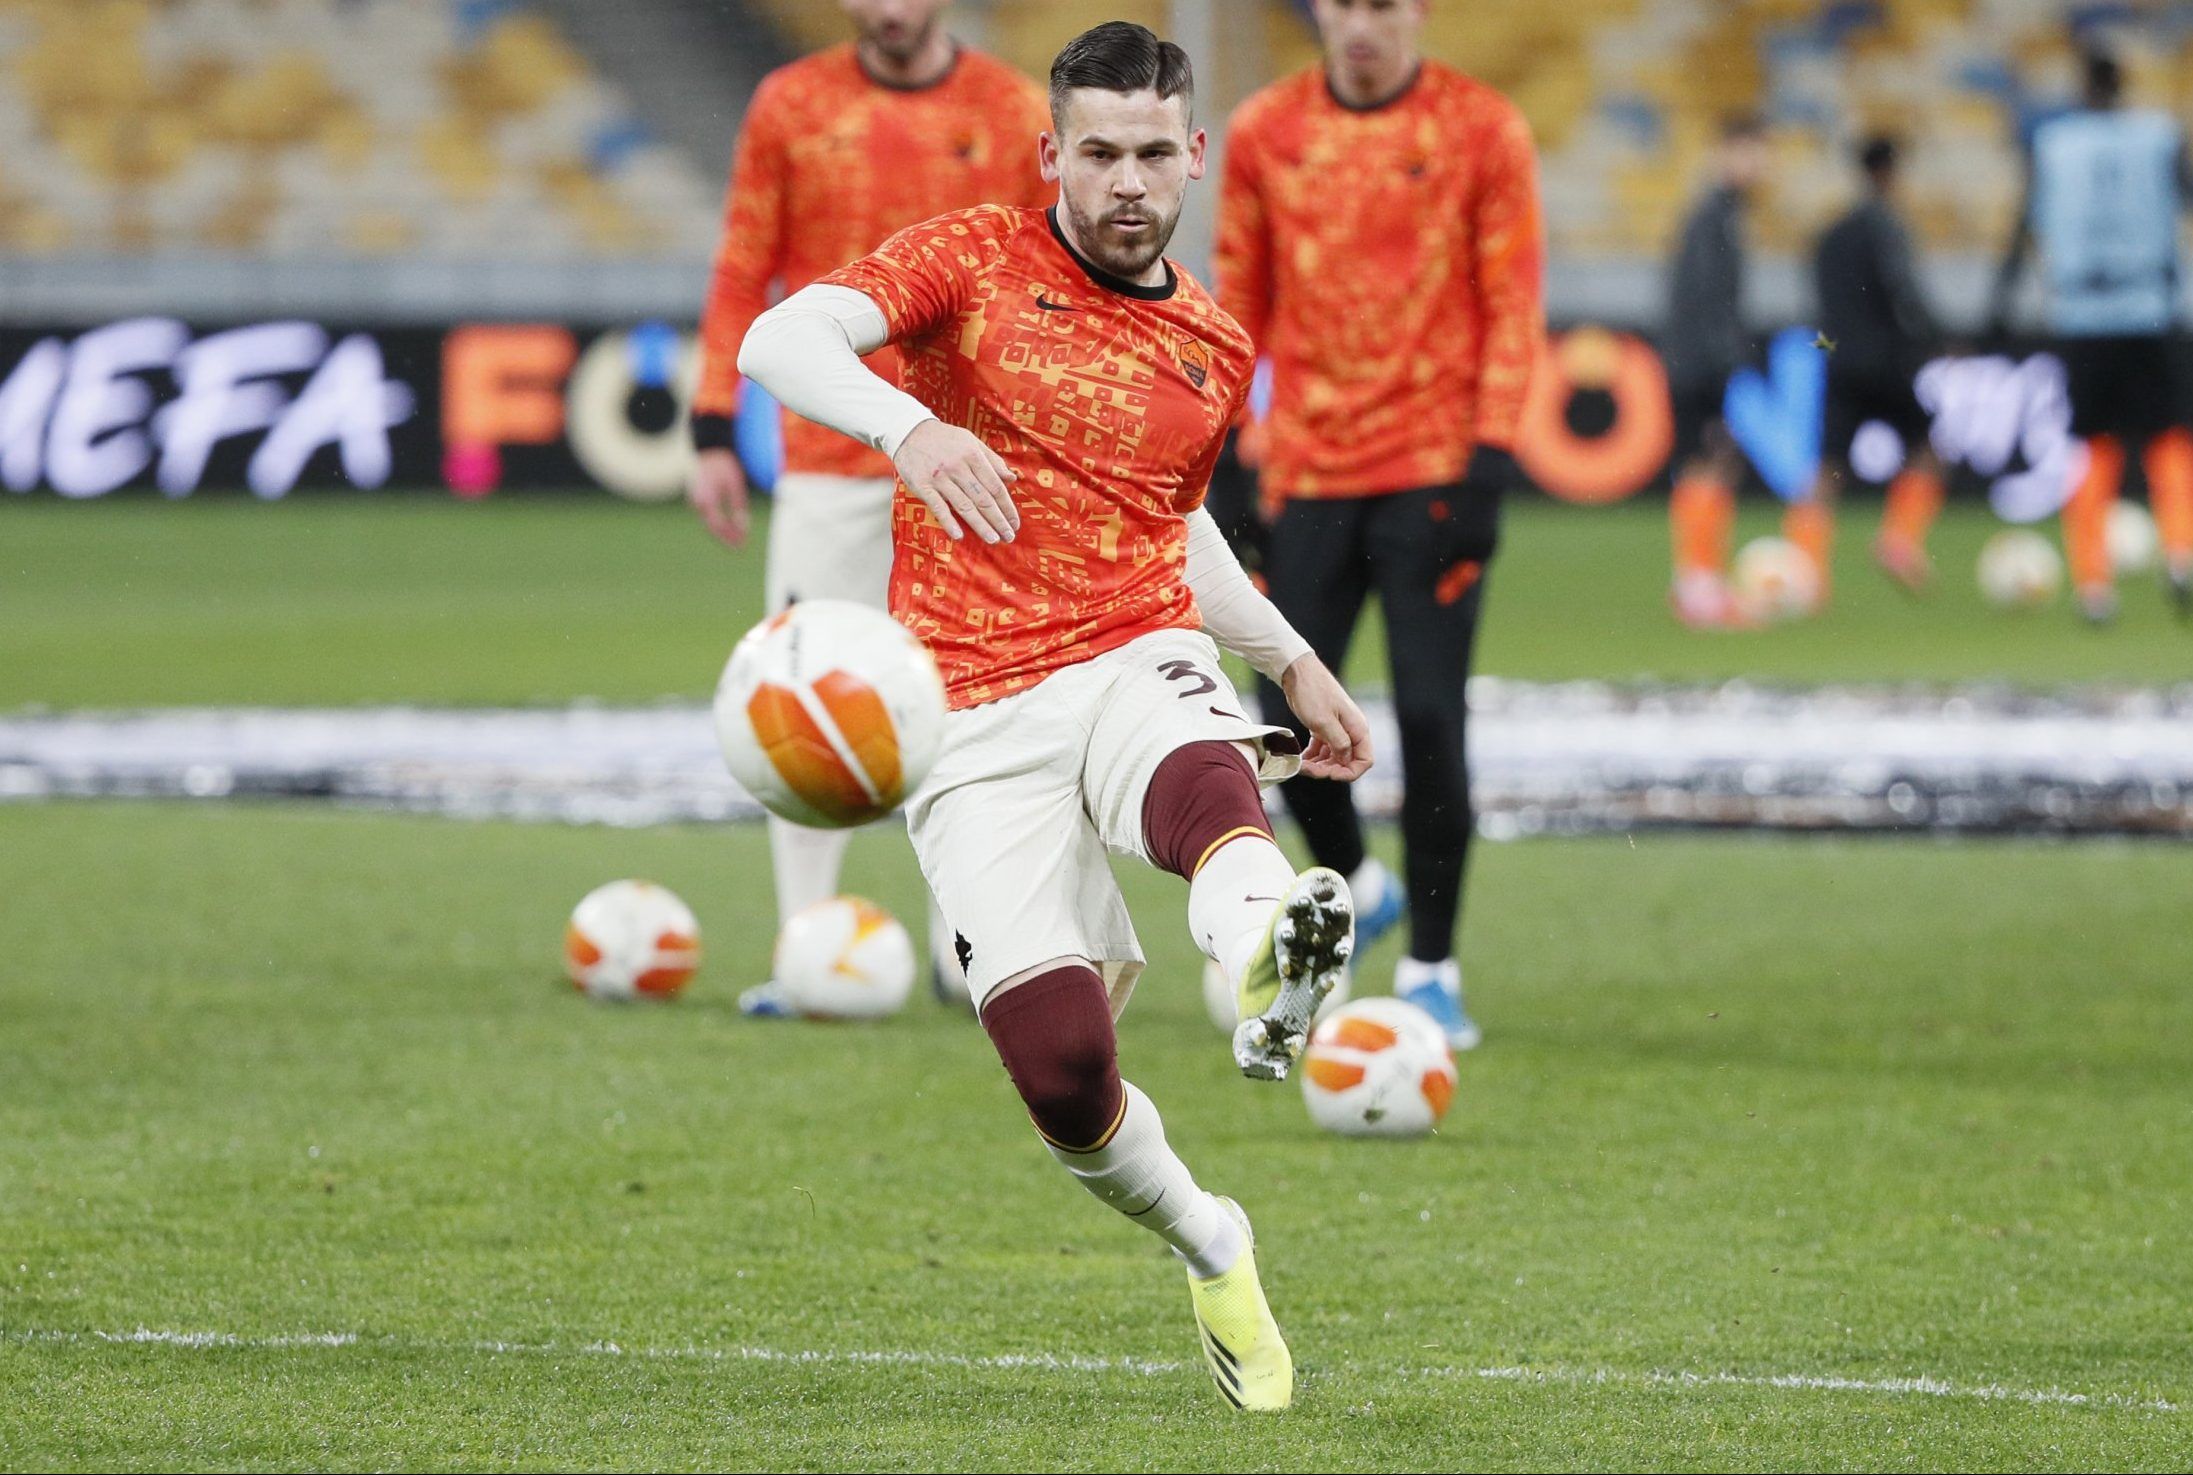 AS Roma's Roger Ibanez during warm up against Shakhtar Donetsk in the Europa League